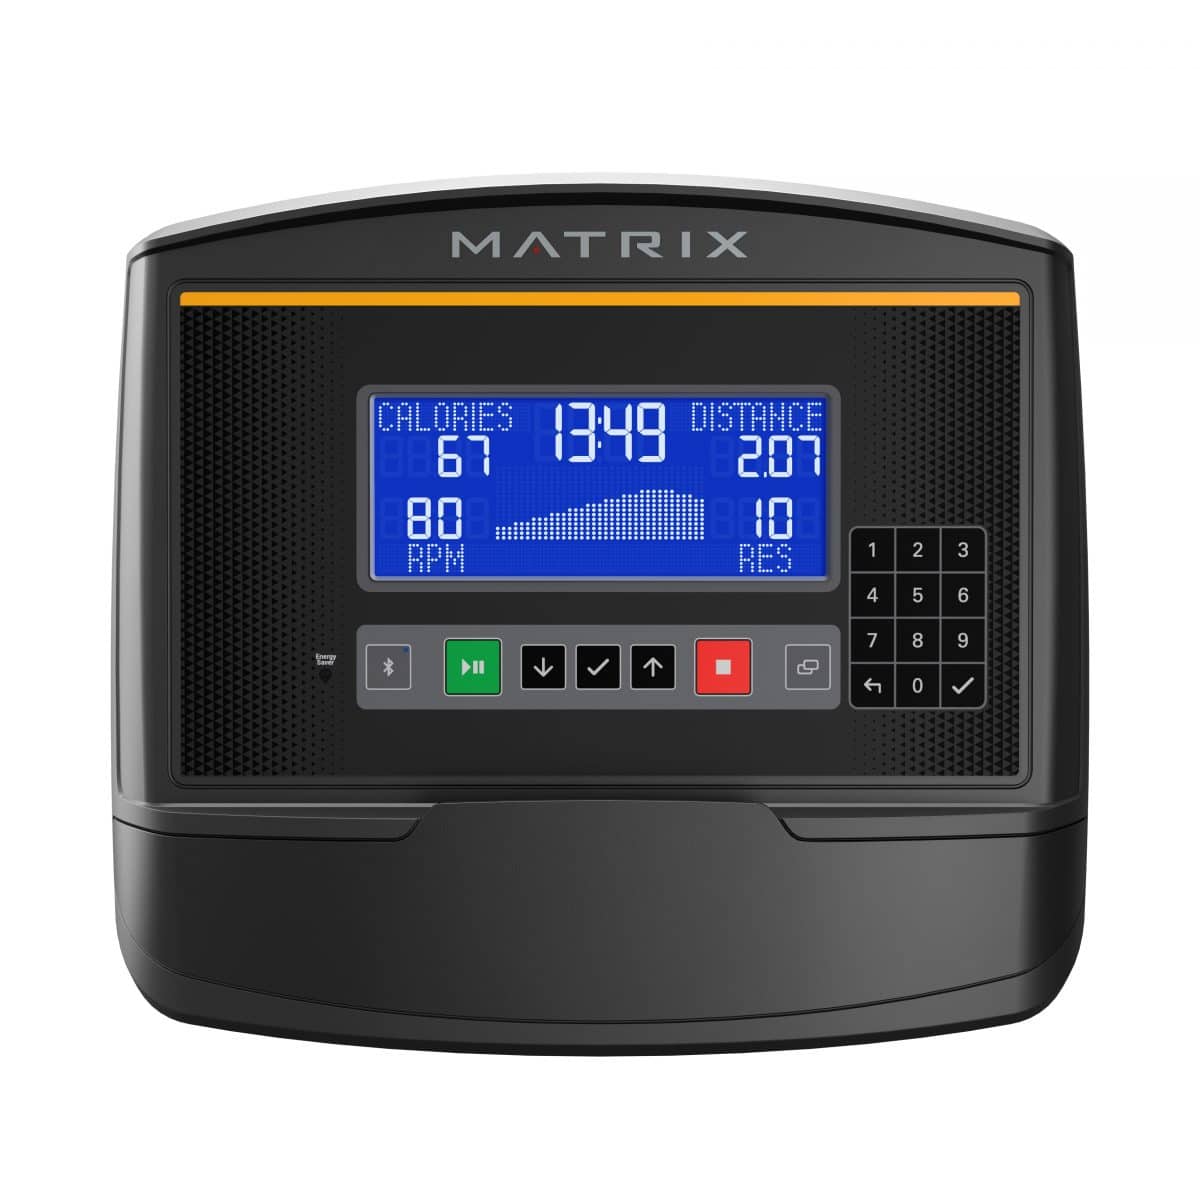 A matrix fitness machine with a lcd display.